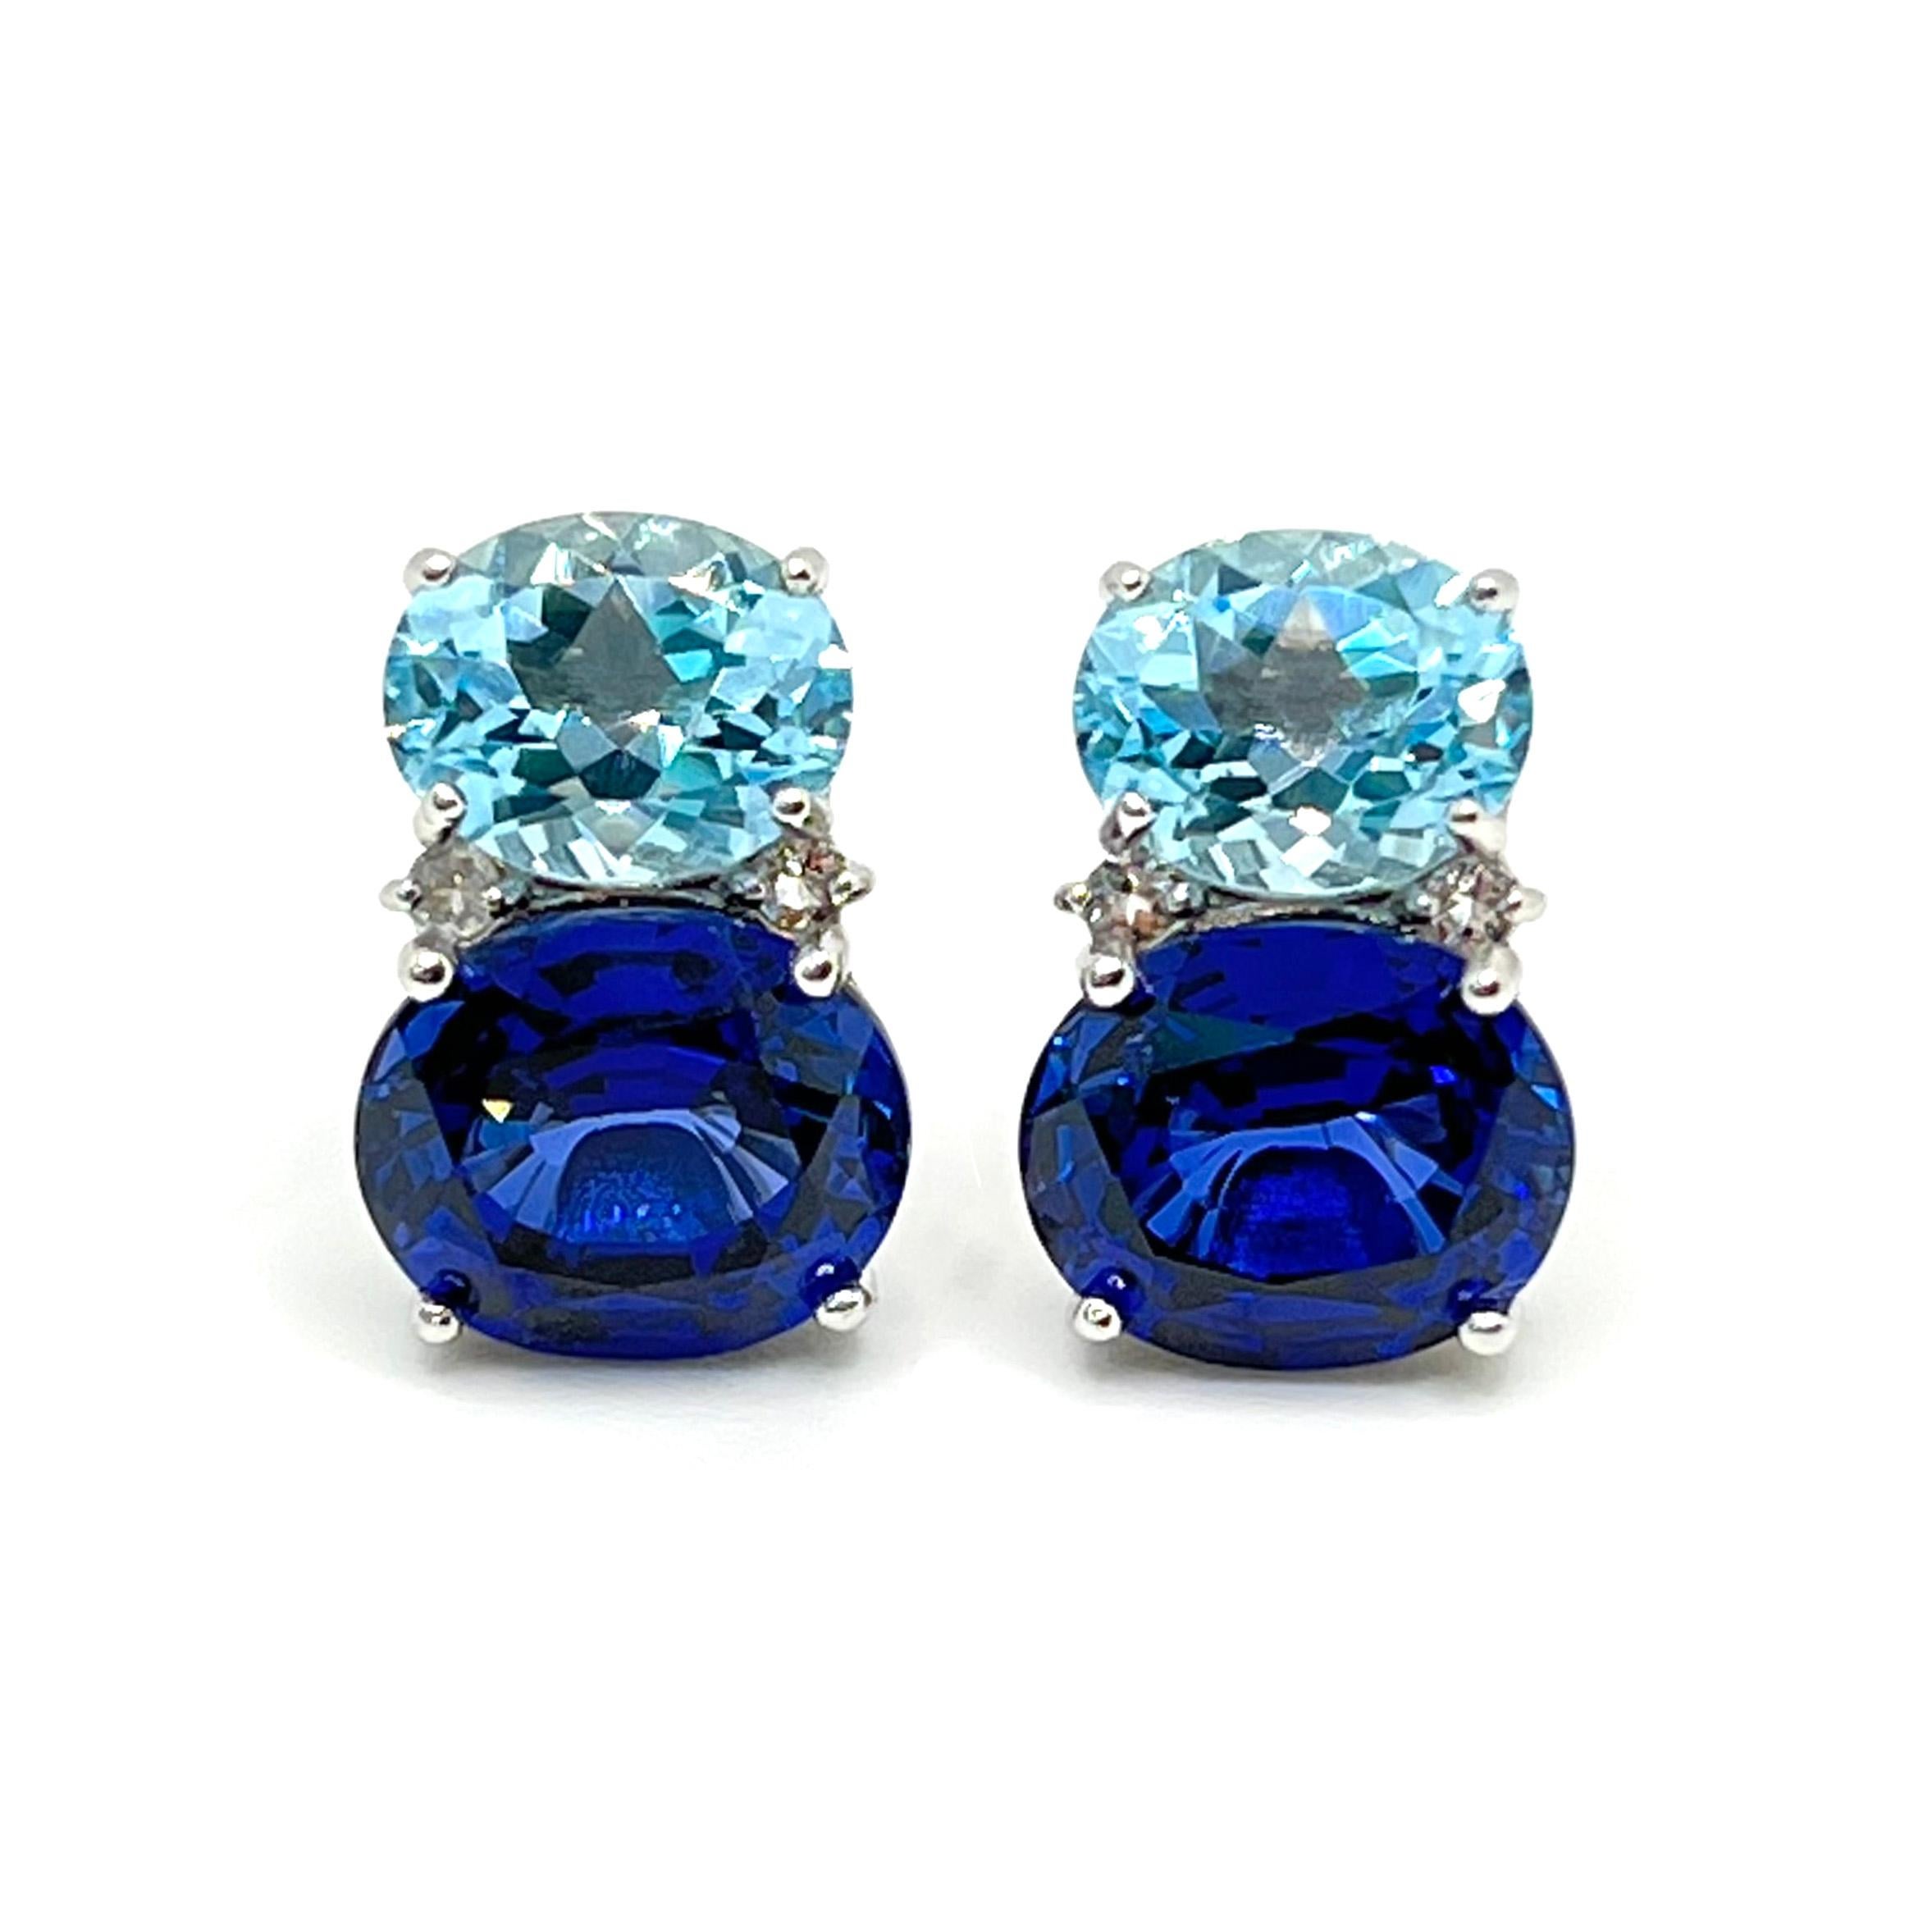 These stunning pair of earrings features a pair of oval sky blue topaz, lab-created blue sapphire, adorned with round white topaz on the side, handset in platinum rhodium plated sterling silver. The two-tone blue combination just look so great